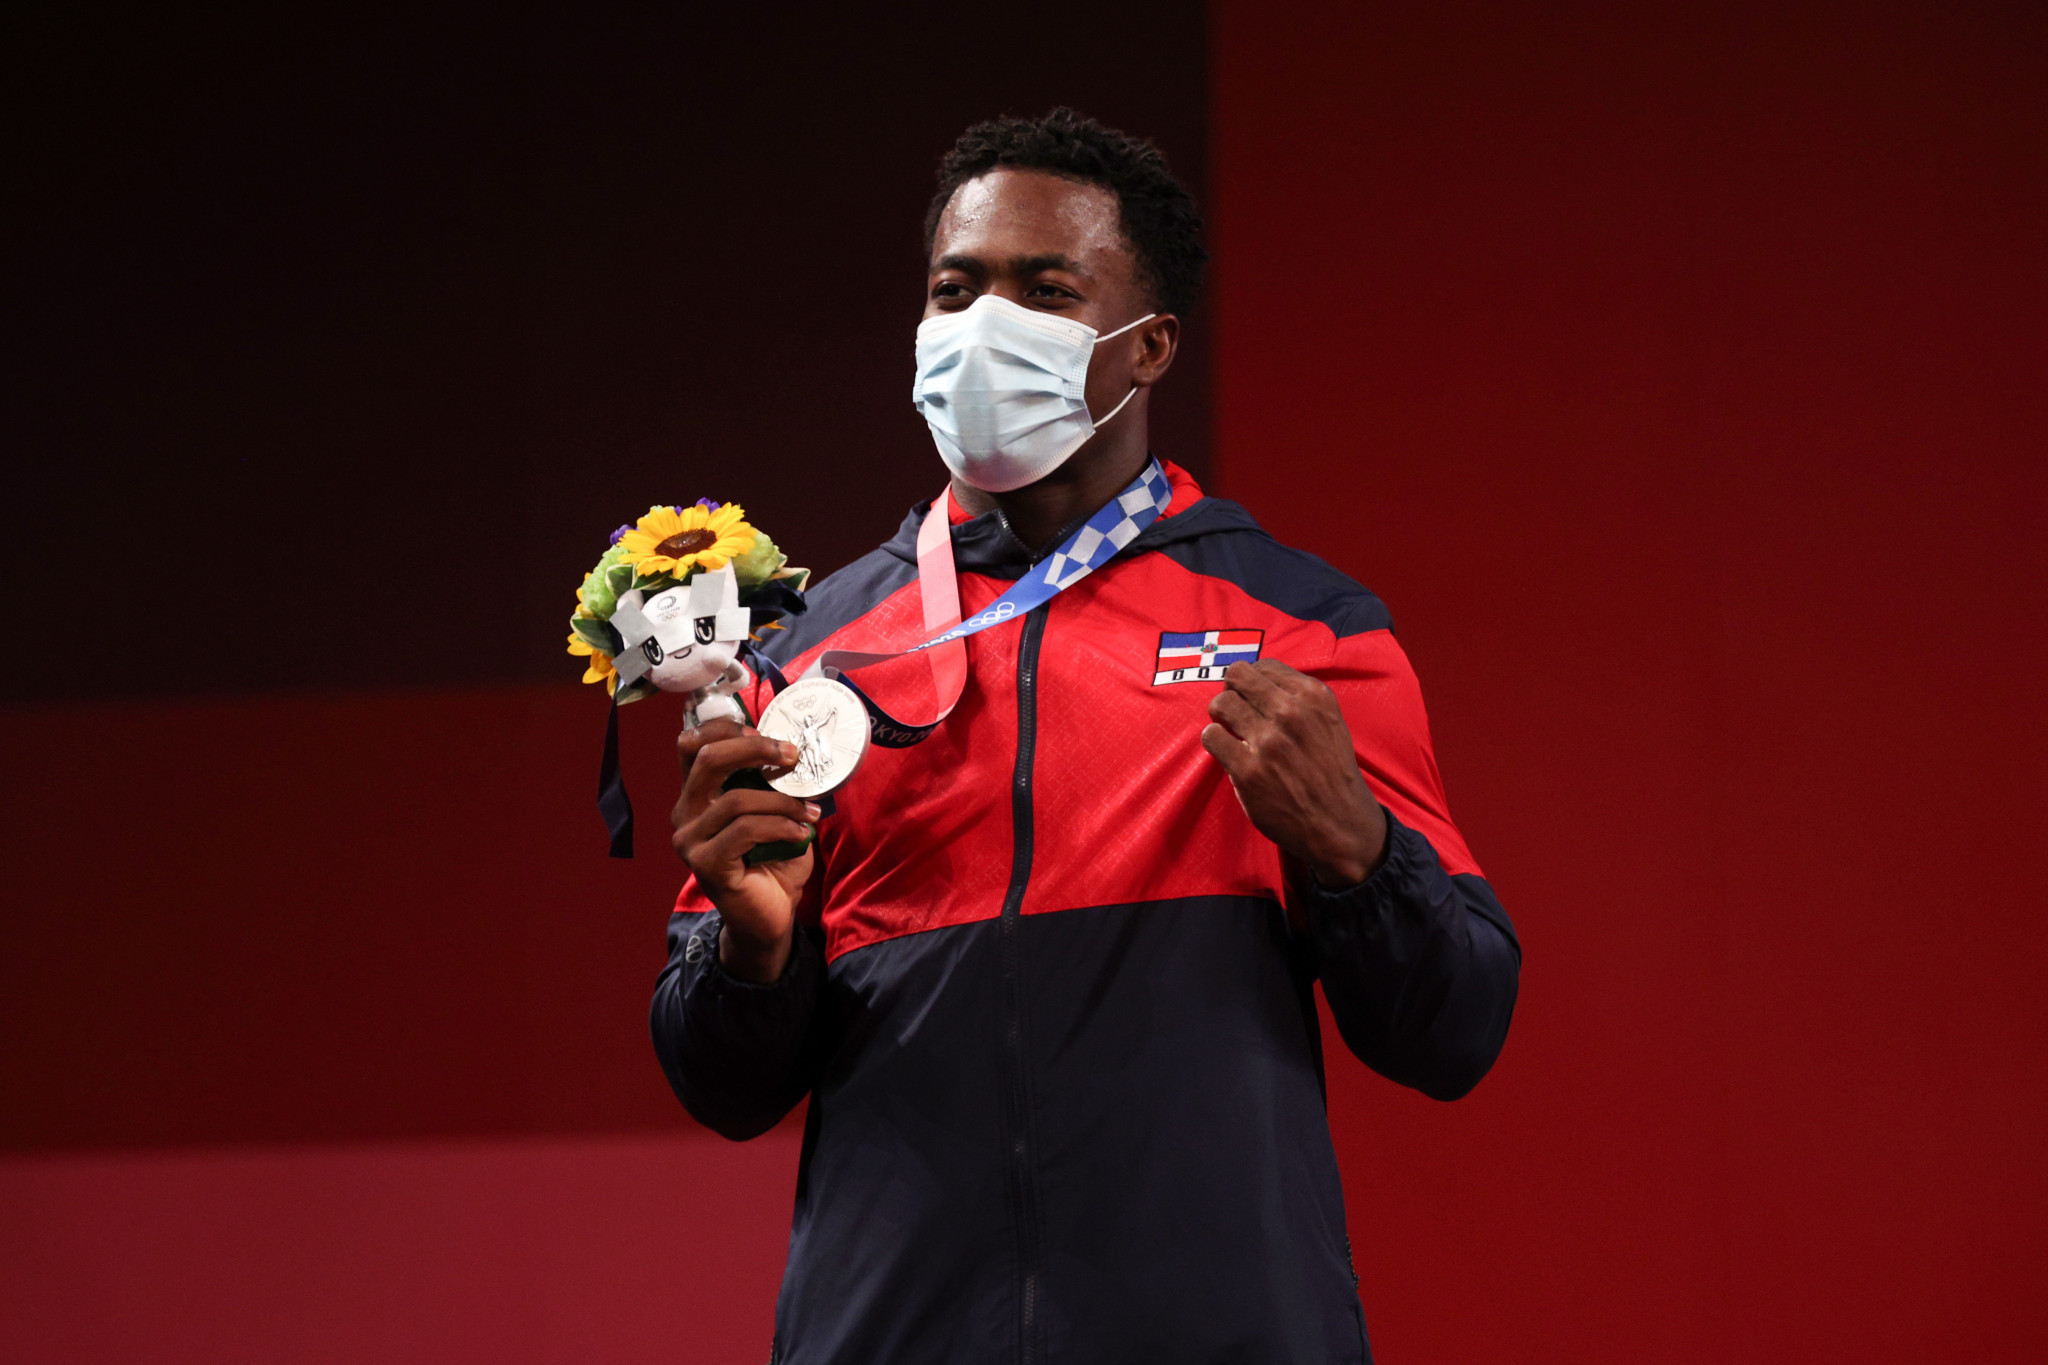 Zaccarias Bonnat, an Olympic silver medallist from Dominican Republic, resigned from the Athletes' Commission and the IWF Board after testing positive for the androgen receptor SARMS RAD140 last December ©Getty Images